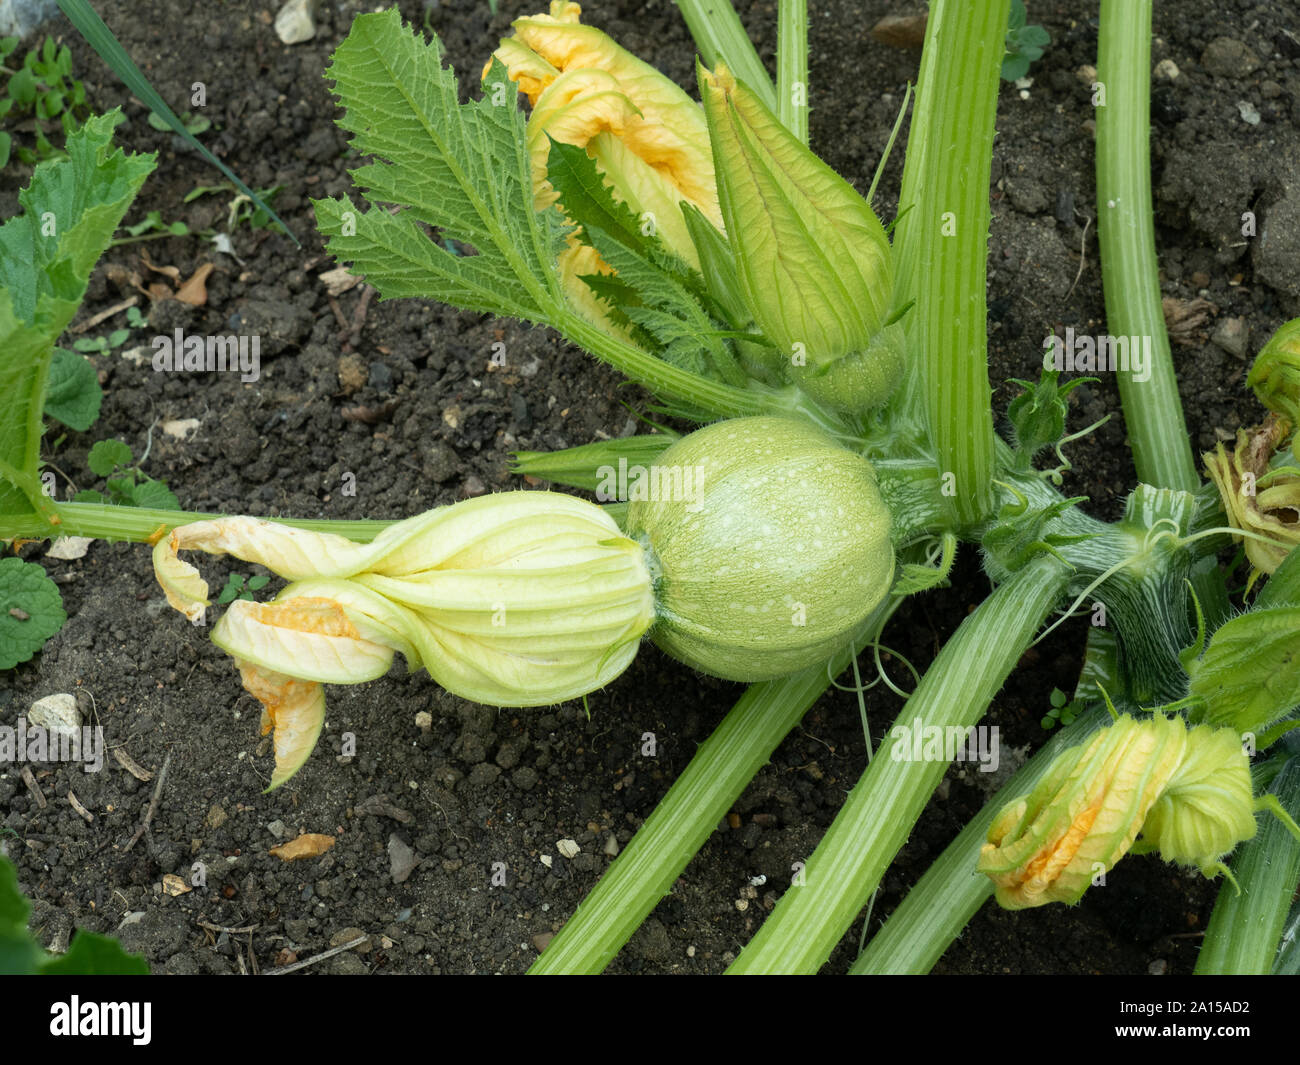 A developing courgette of the unusual round variety Tondo di Piacenza Stock Photo